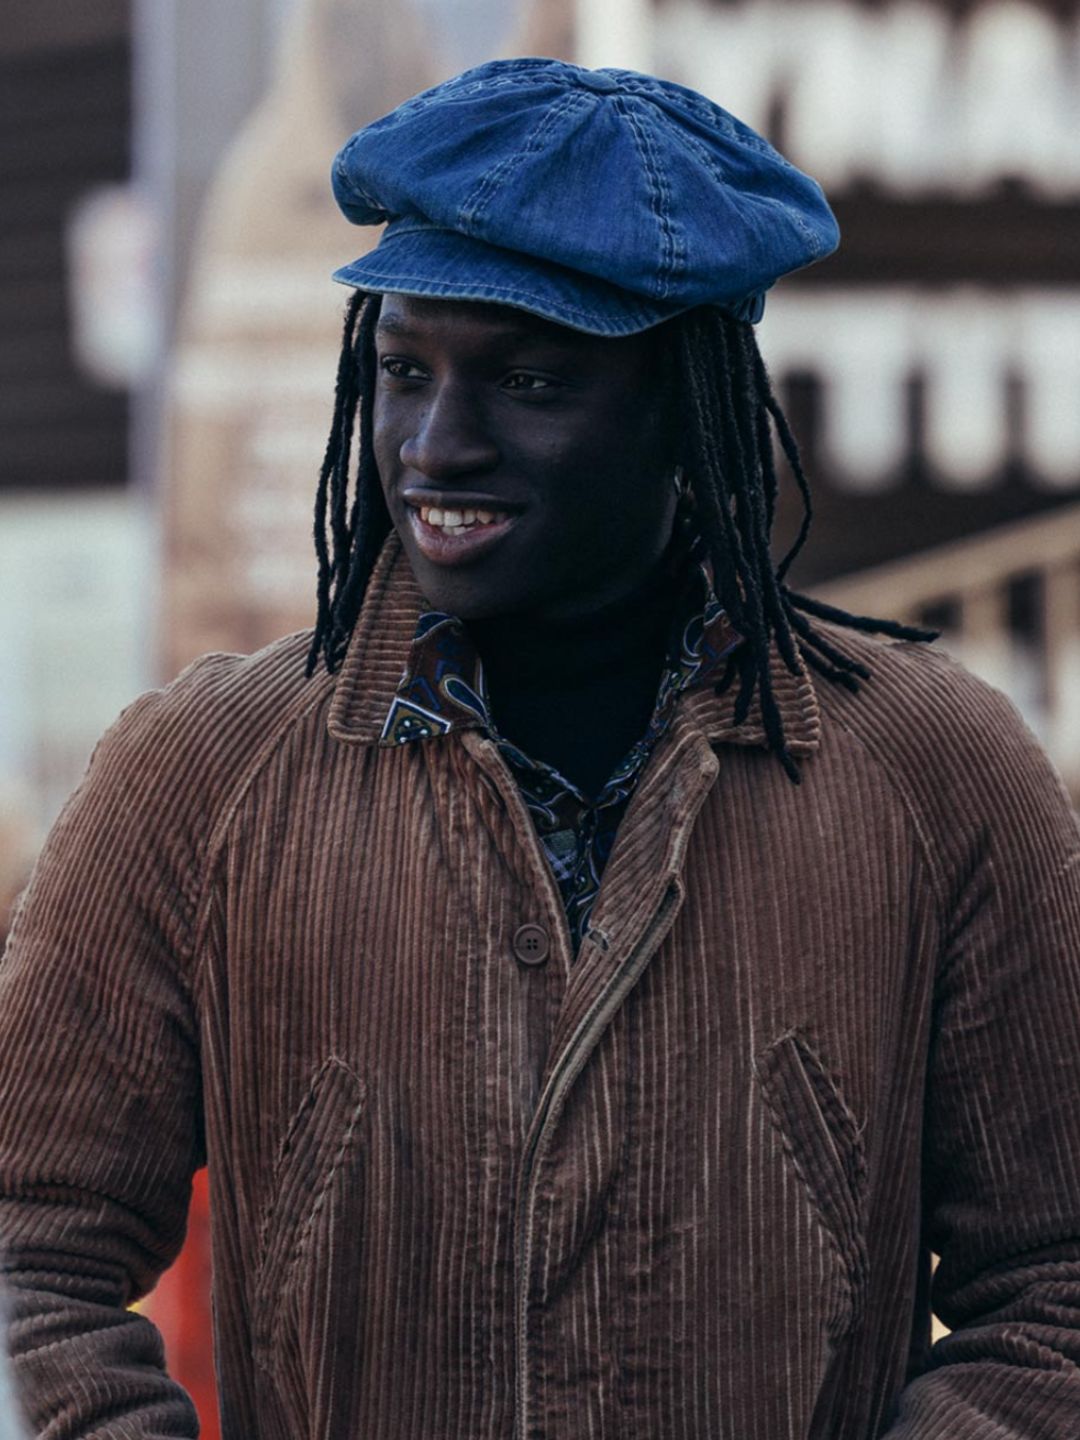 A Pitti Uomo attendee wears a denim baker boy cap and a brown corduroy jacket 